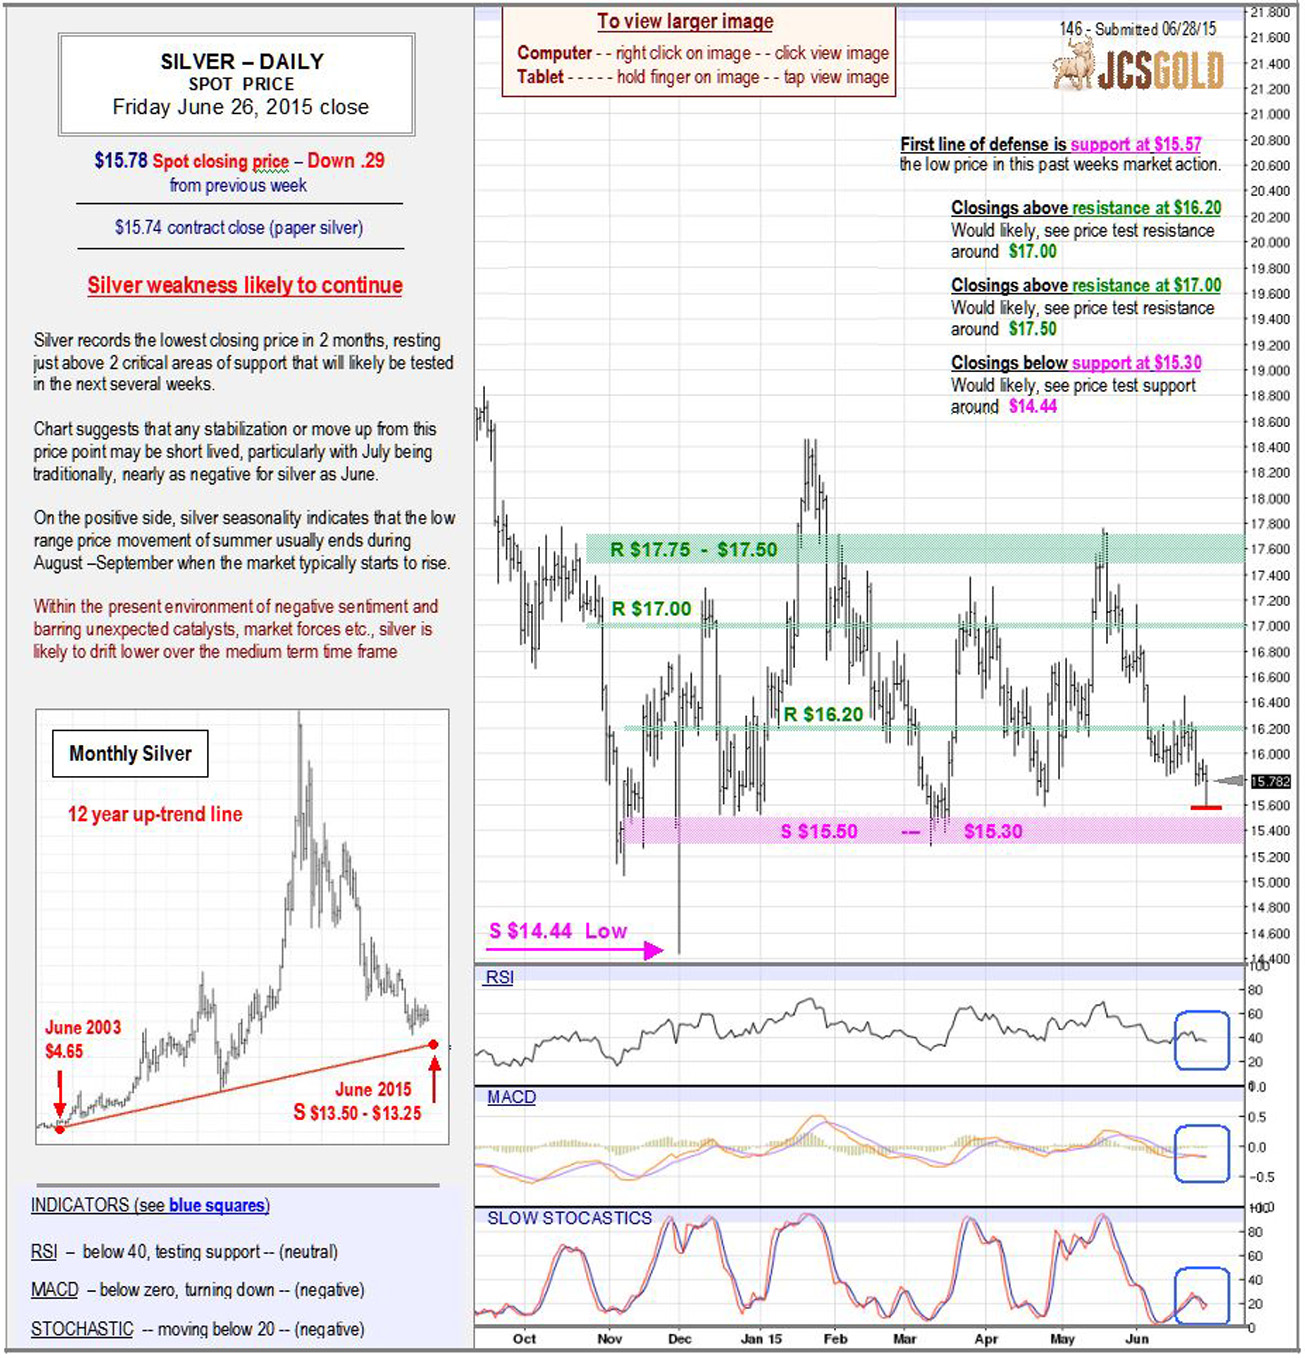 June 26, 2015 chart & commentary